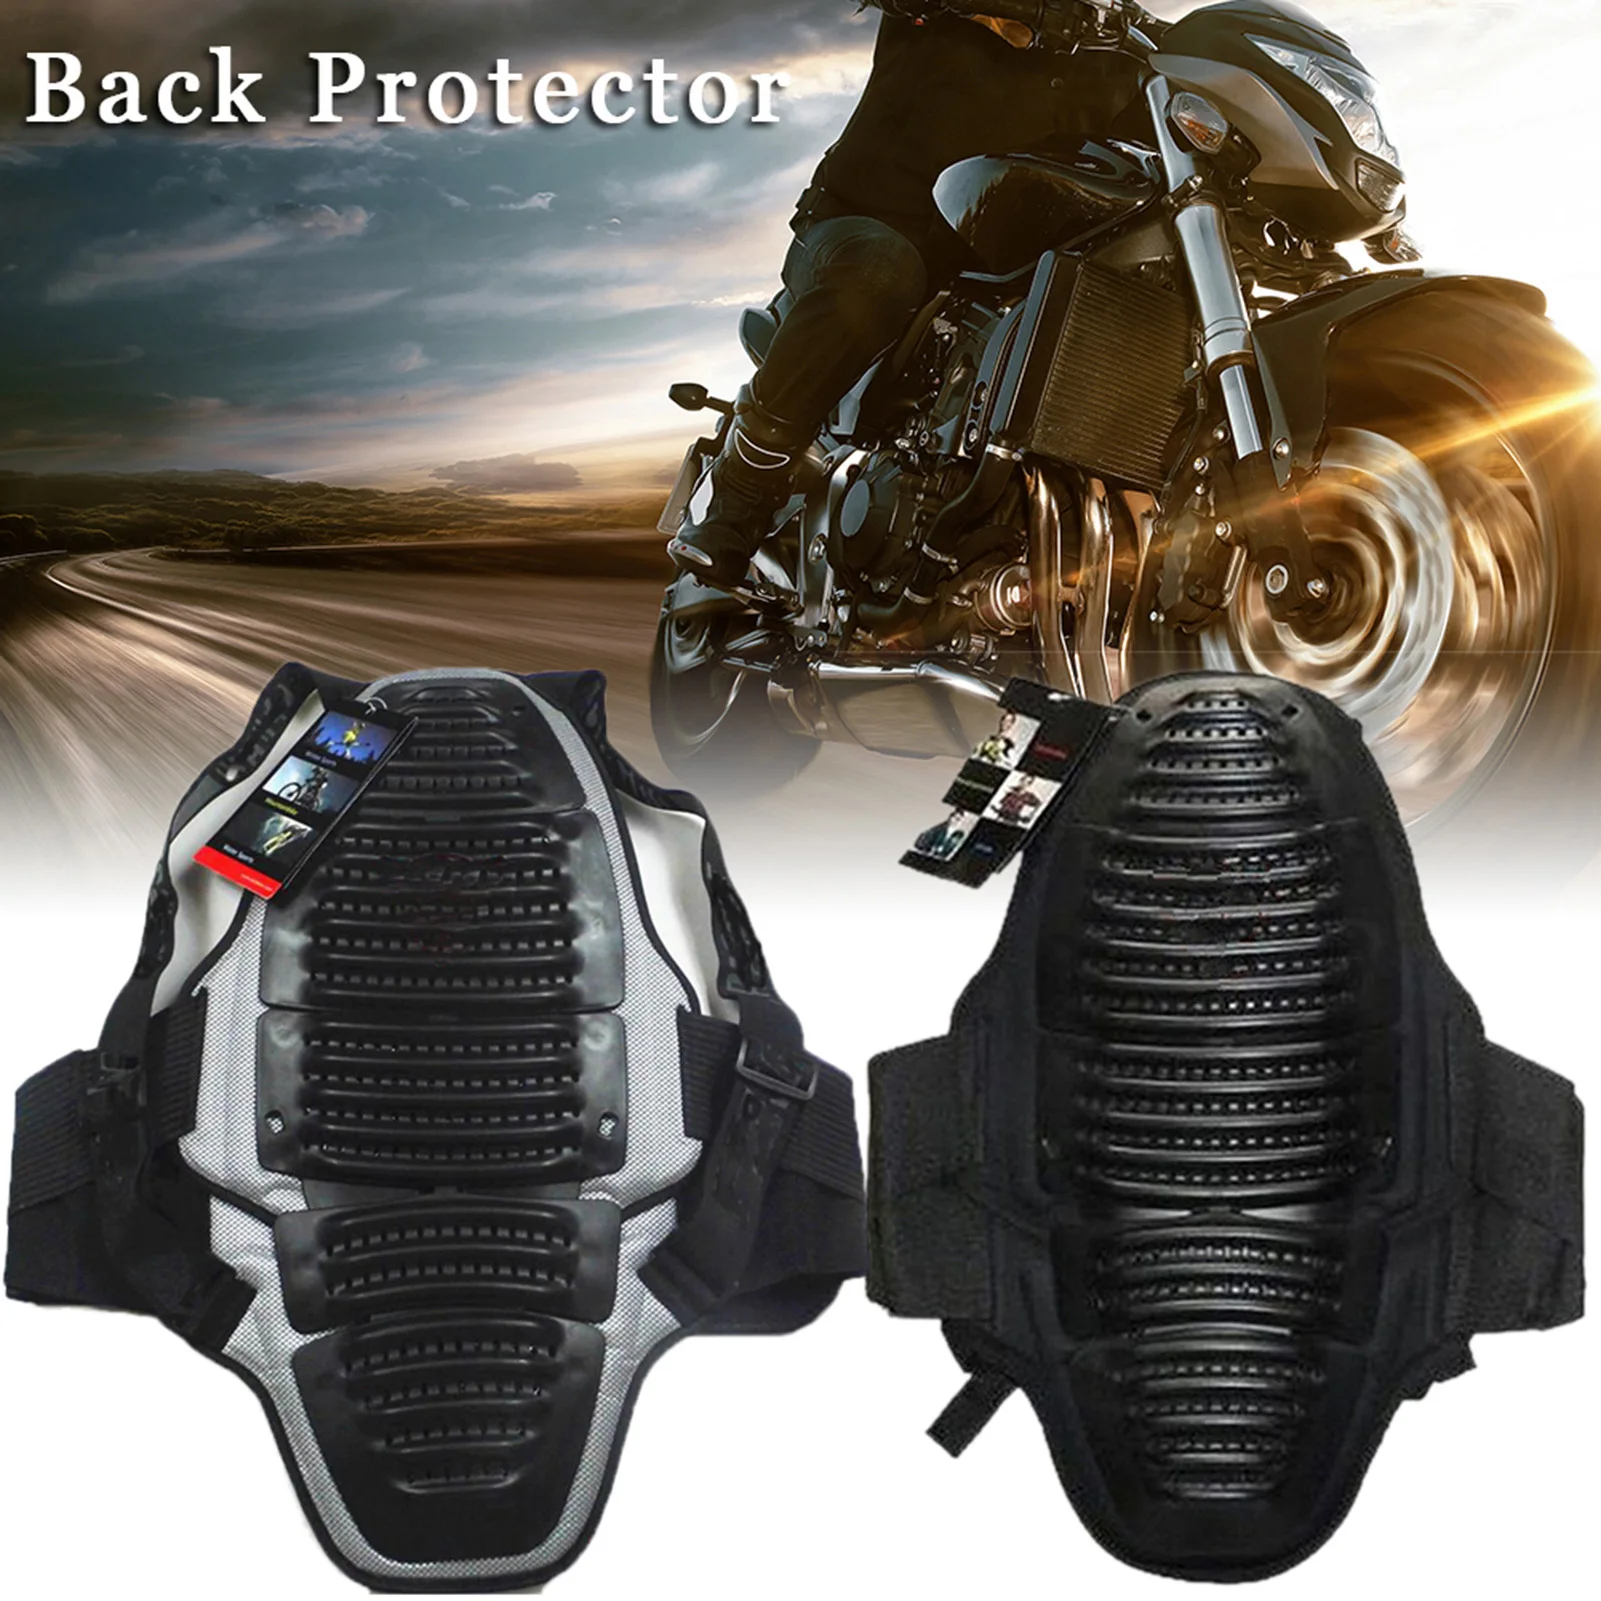 

Breathable Motorcycle Knight Back Protector Professional EVA Armor Riding Equipment Extreme Sports Detachable Protection Safe